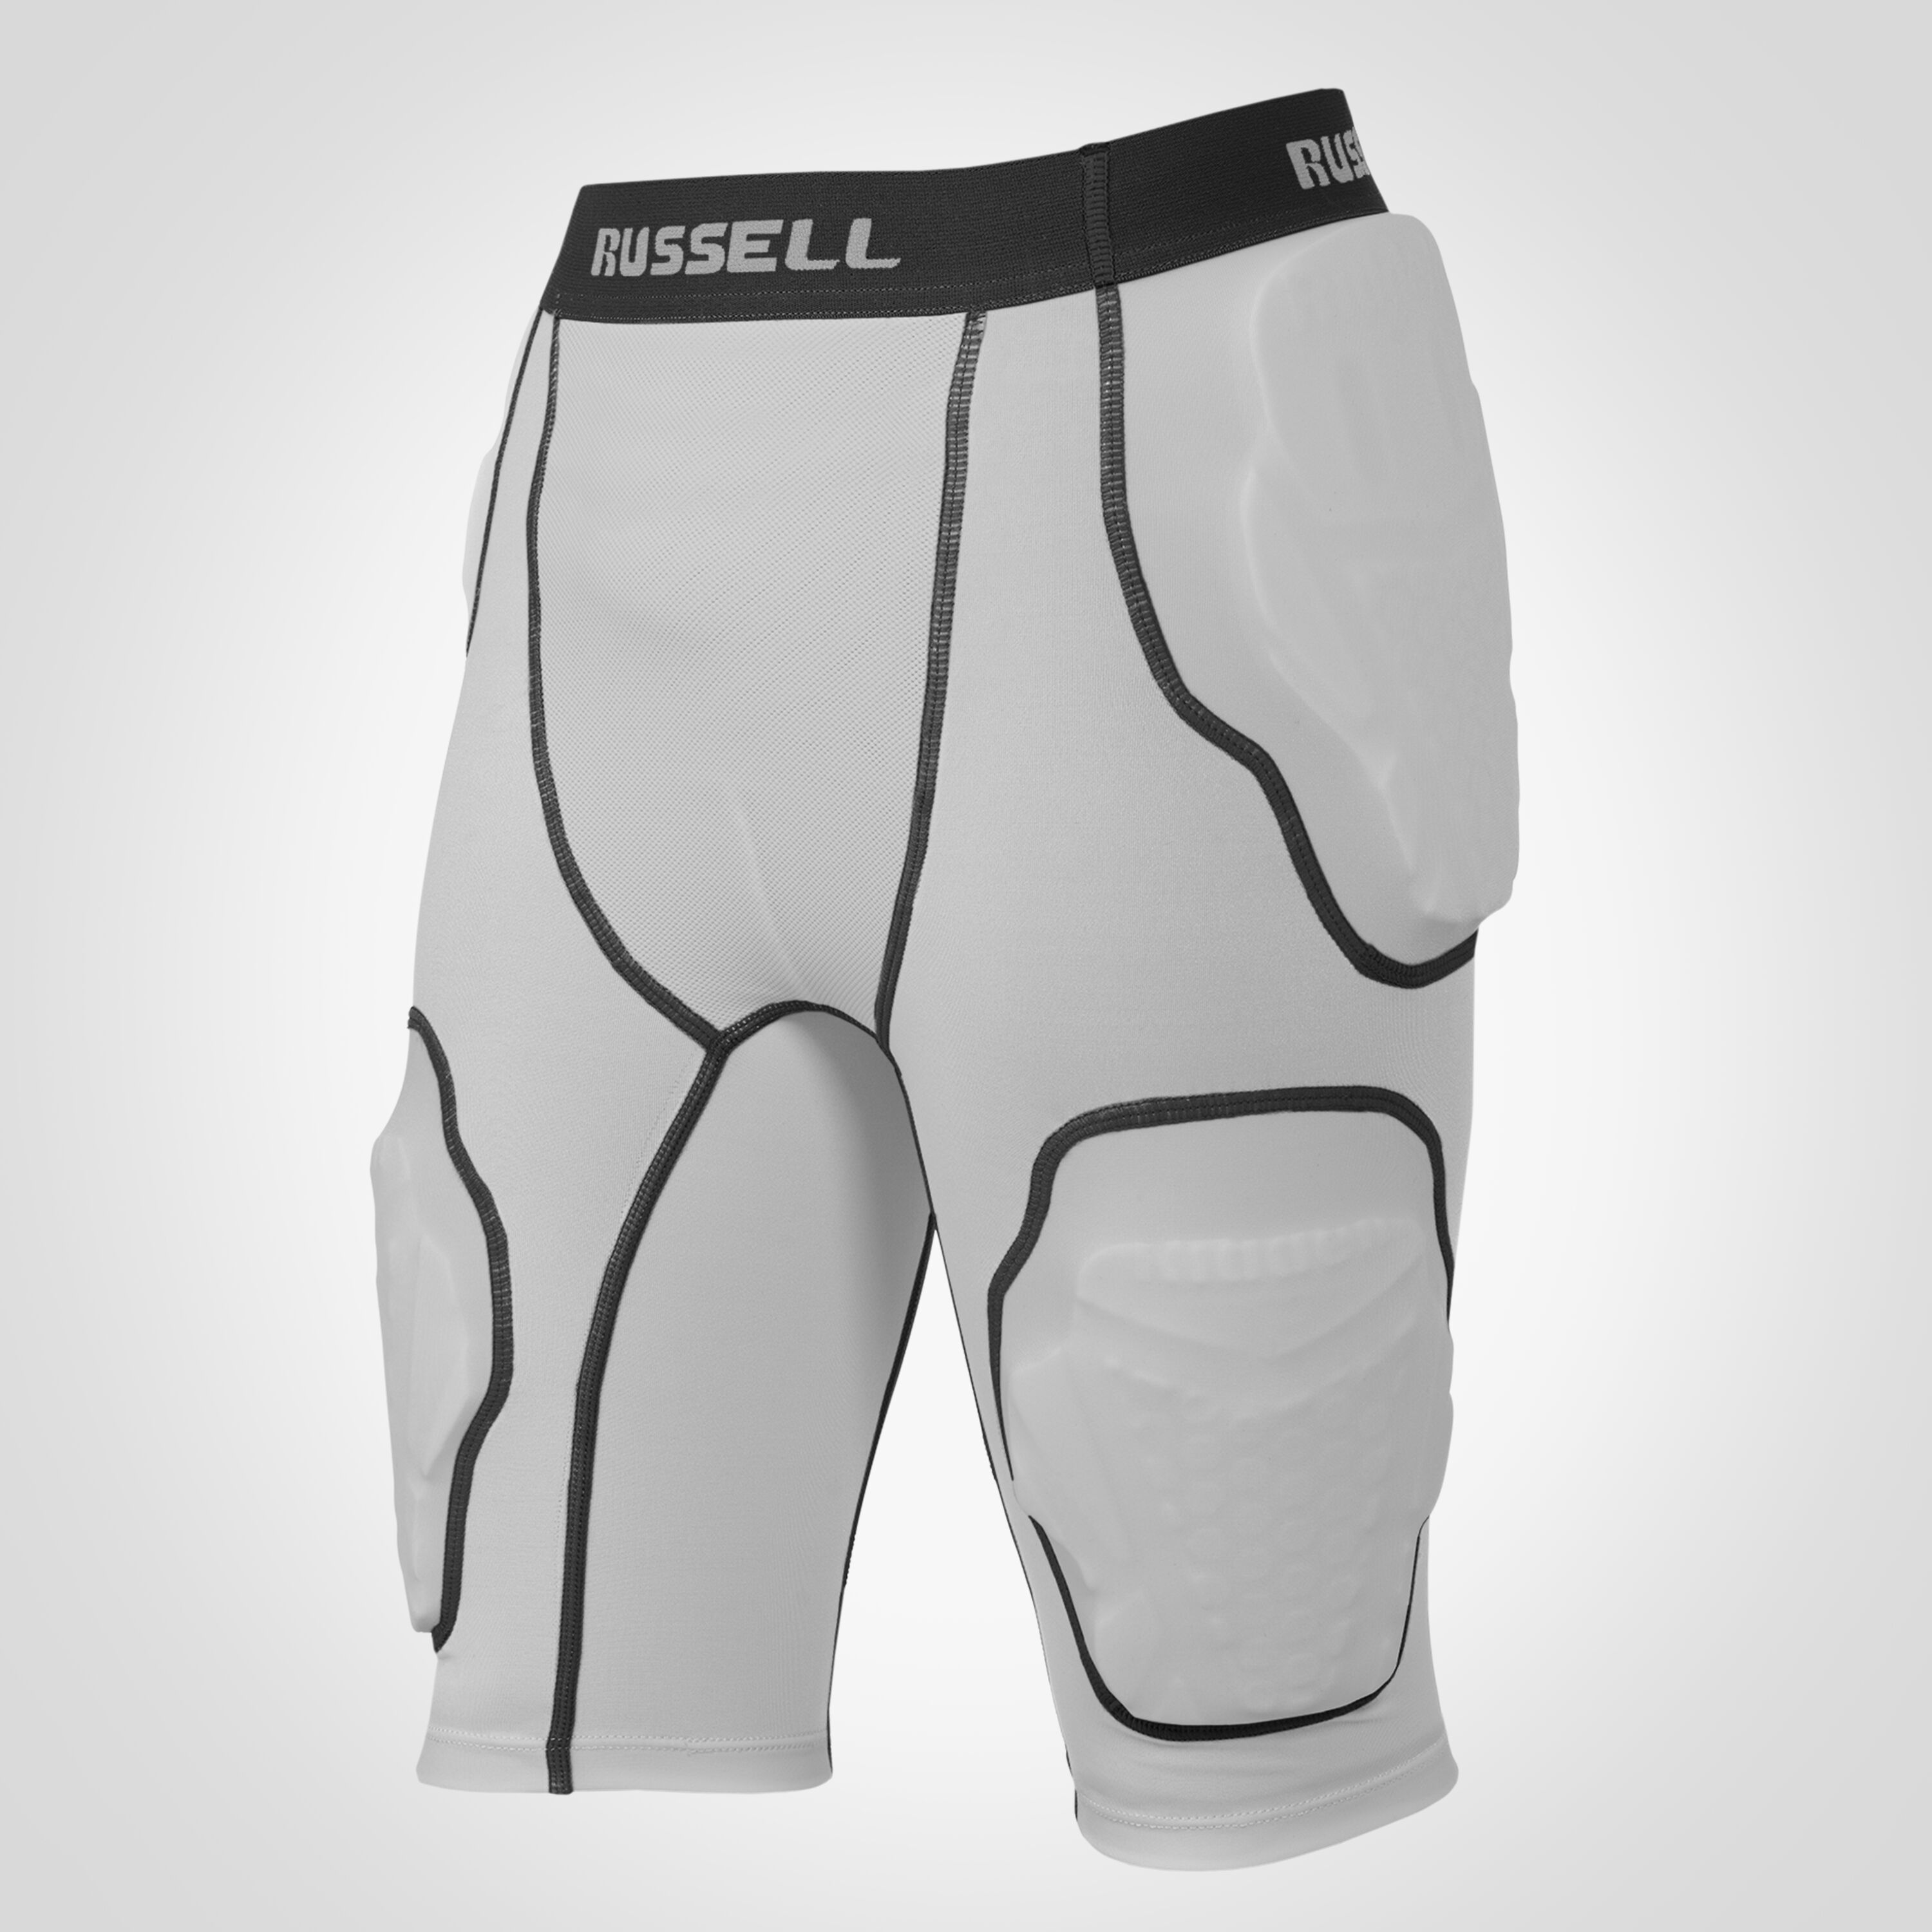 Russell 5-Pad Integrated Adult Football Girdle Silver/Black 3XL 